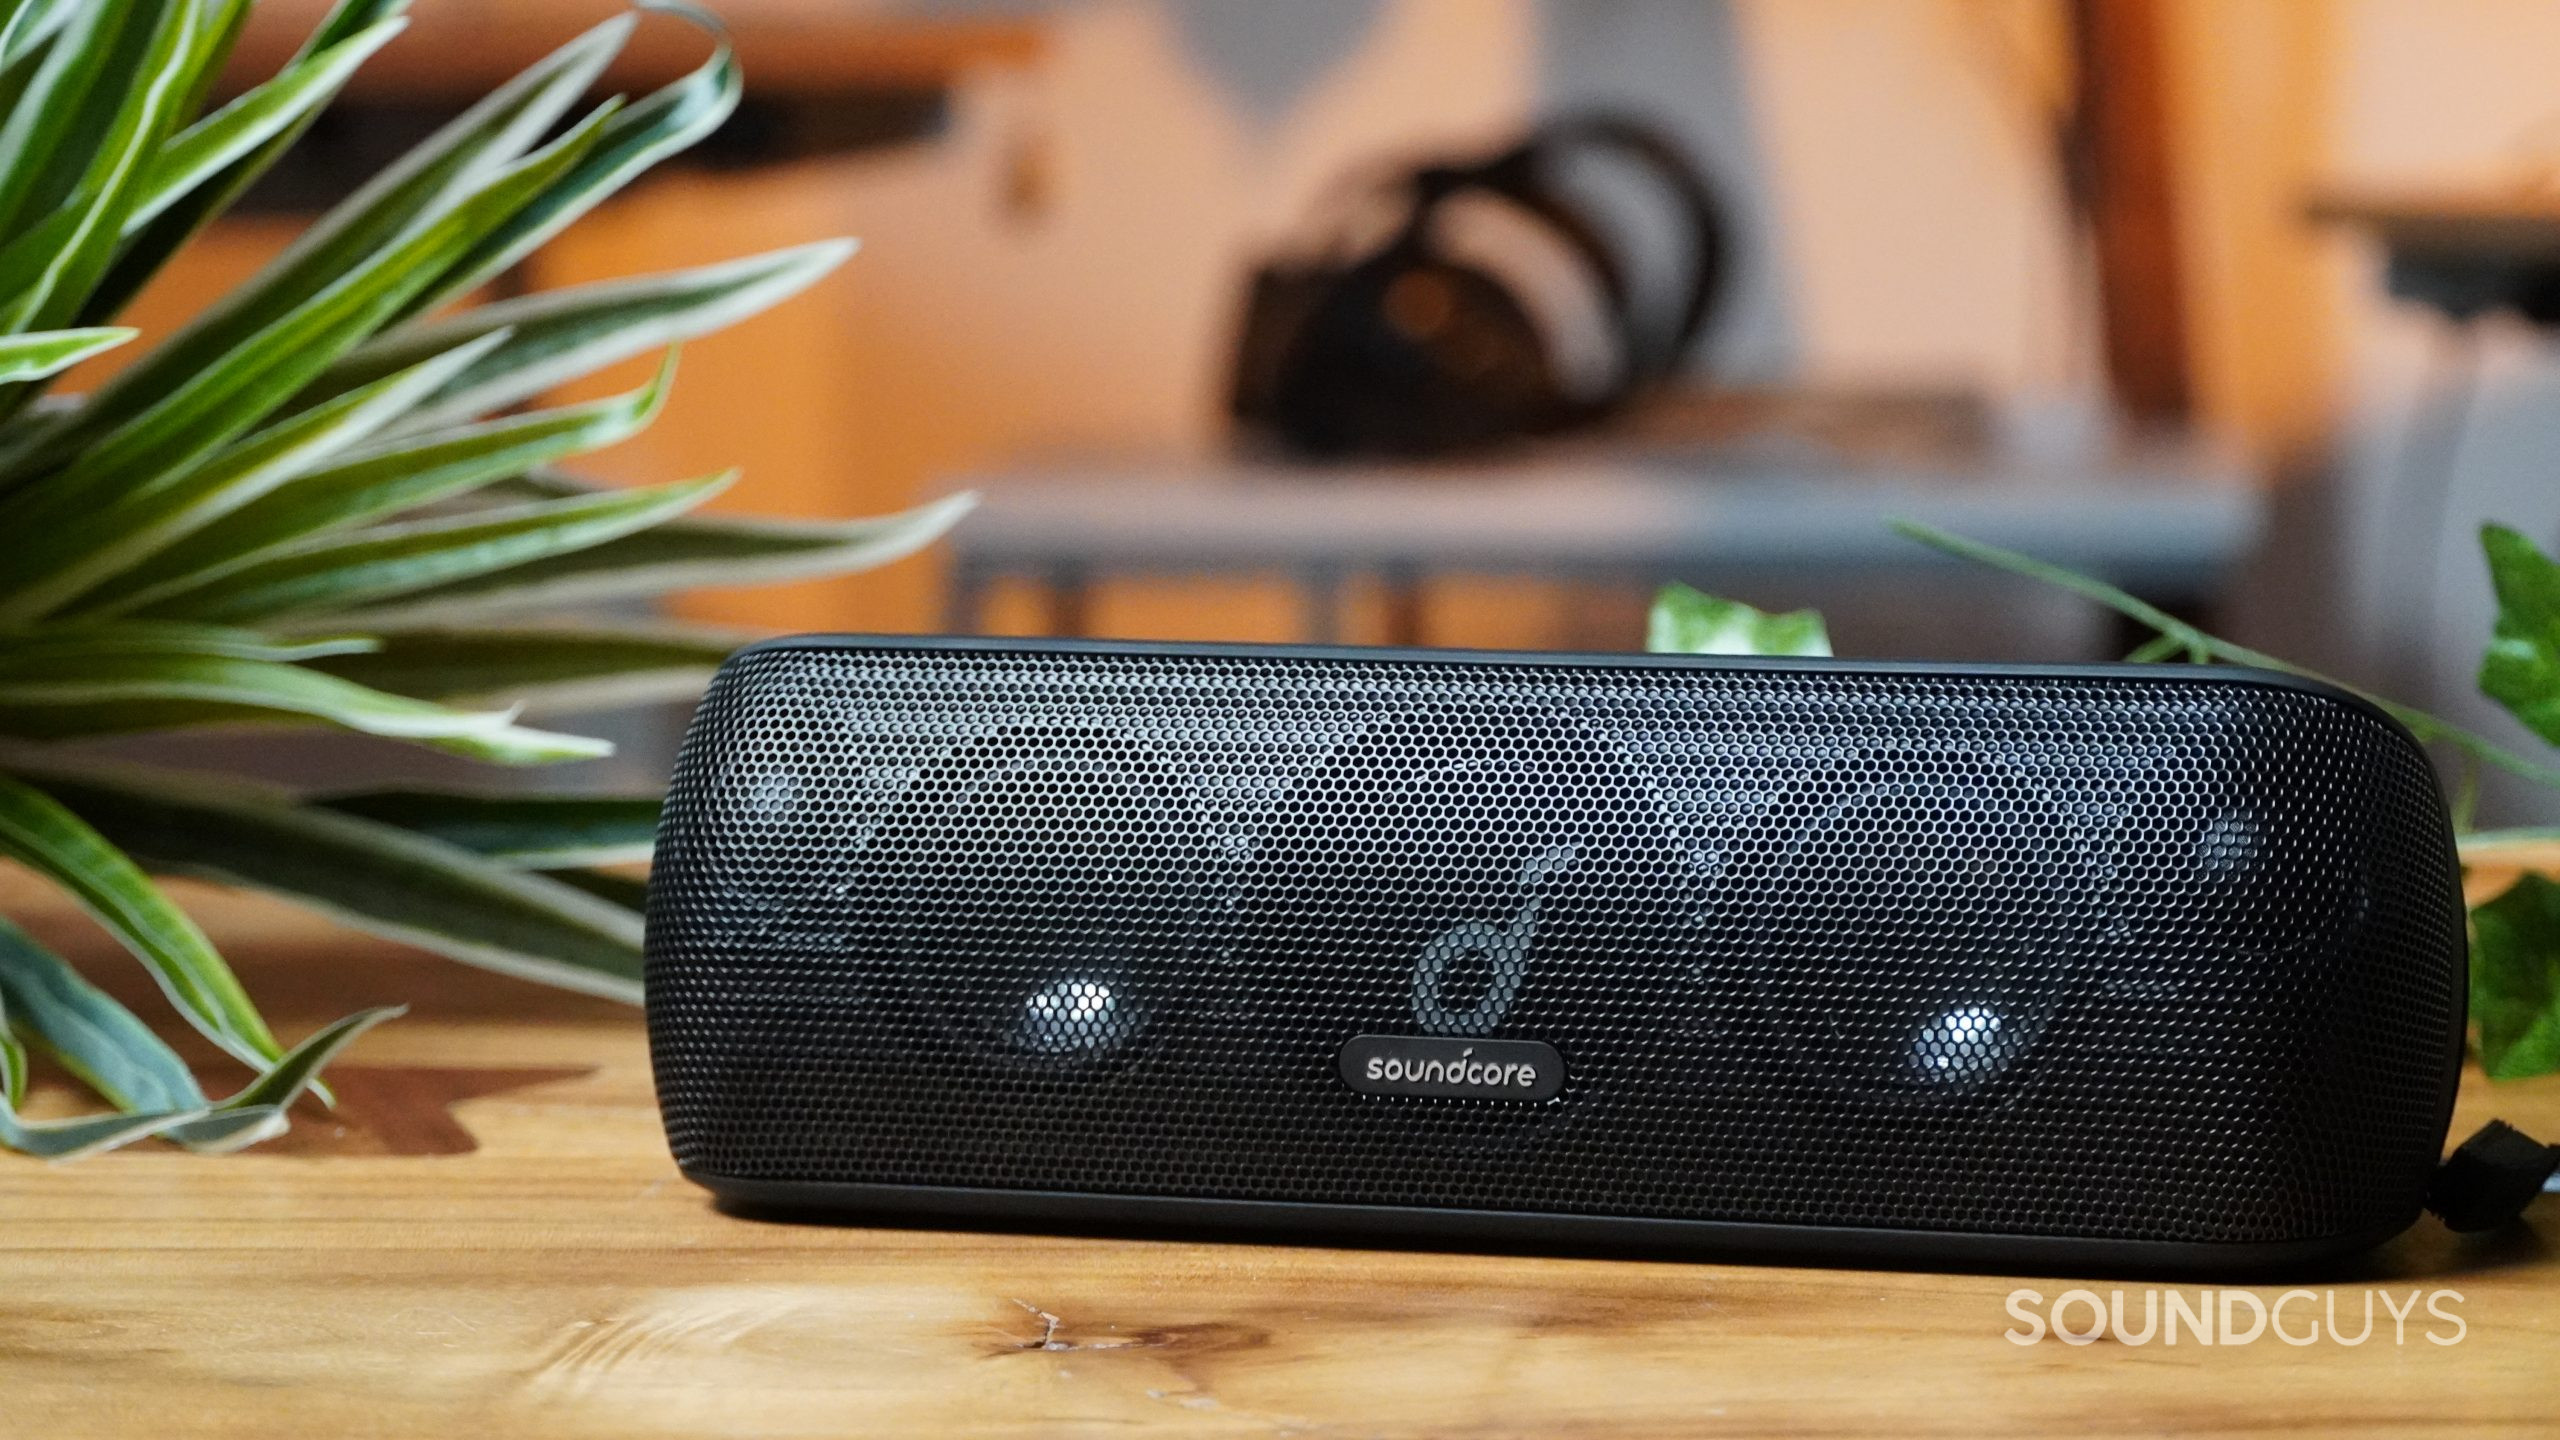 Anker Soundcore Motion+ speaker on a table with plants